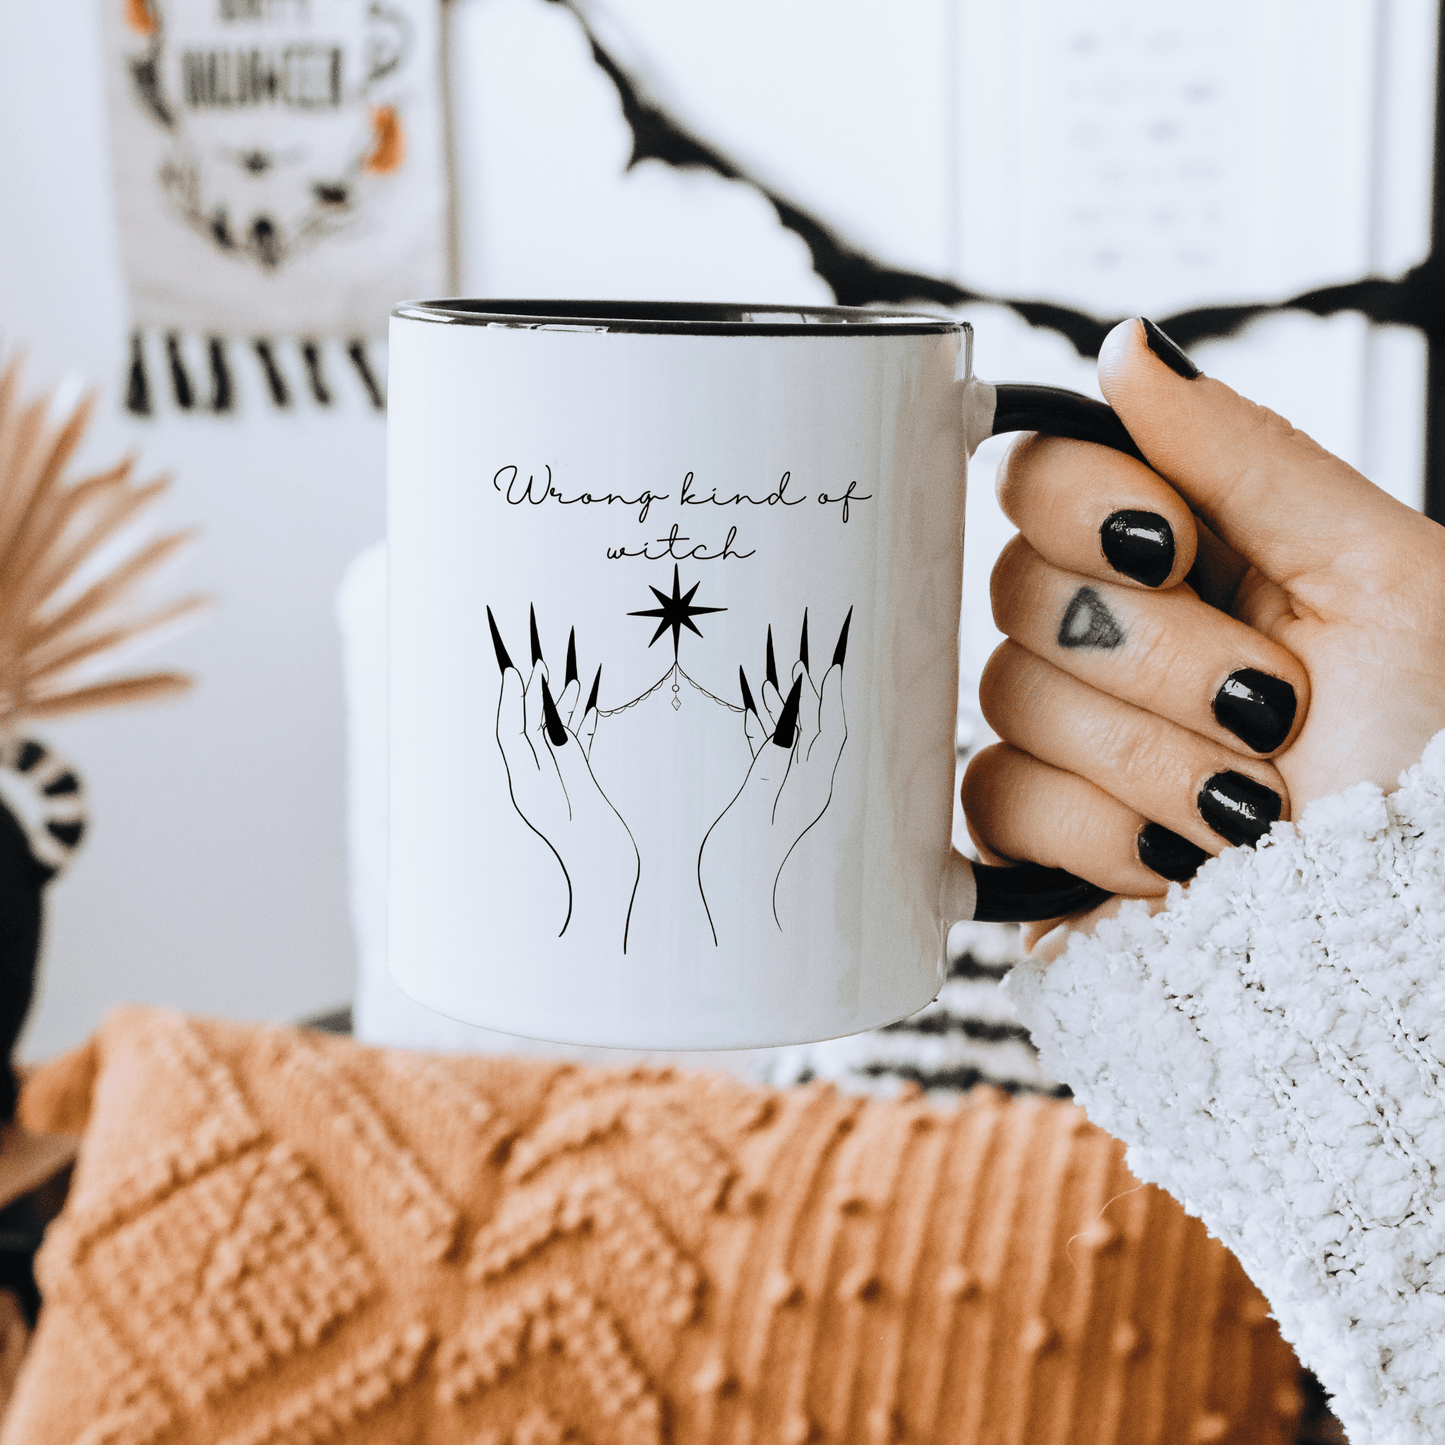 Throne of glass Manon Blackbeak "Wrong kind of witch" mug with black handle - officially licensed by Sarah J. Maas